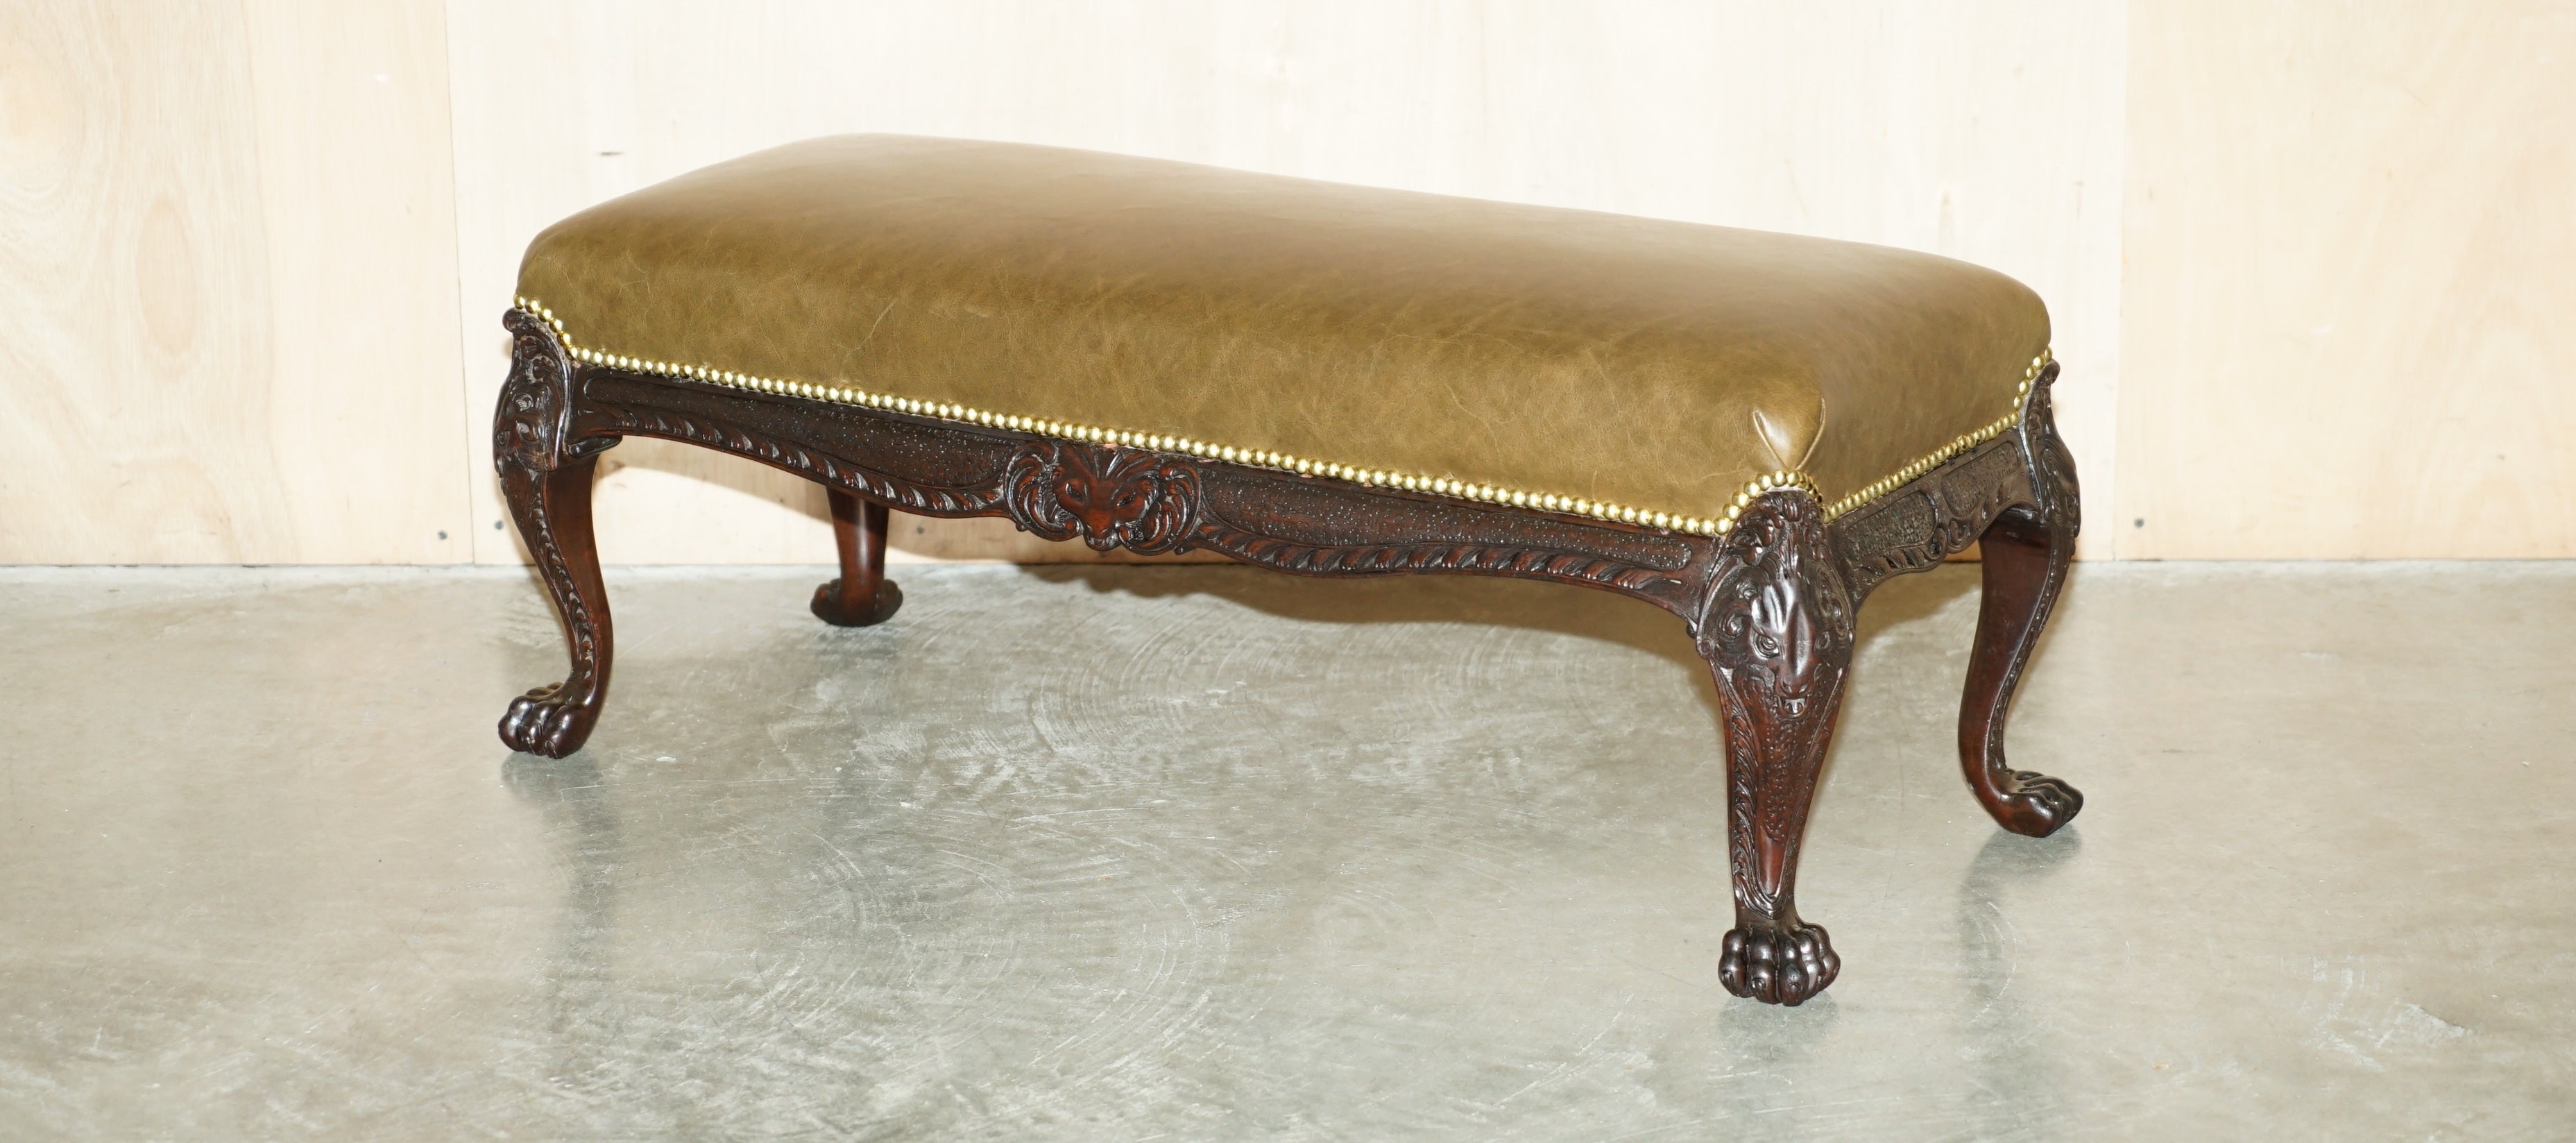 Royal House Antiques

Royal House Antiques is delighted to offer for sale this sublime, ornately hand carved circa 1860 Lions Hairy Paw feet and main, footstool or ottoman with new brown leather upholstery 

Please note the delivery fee listed is